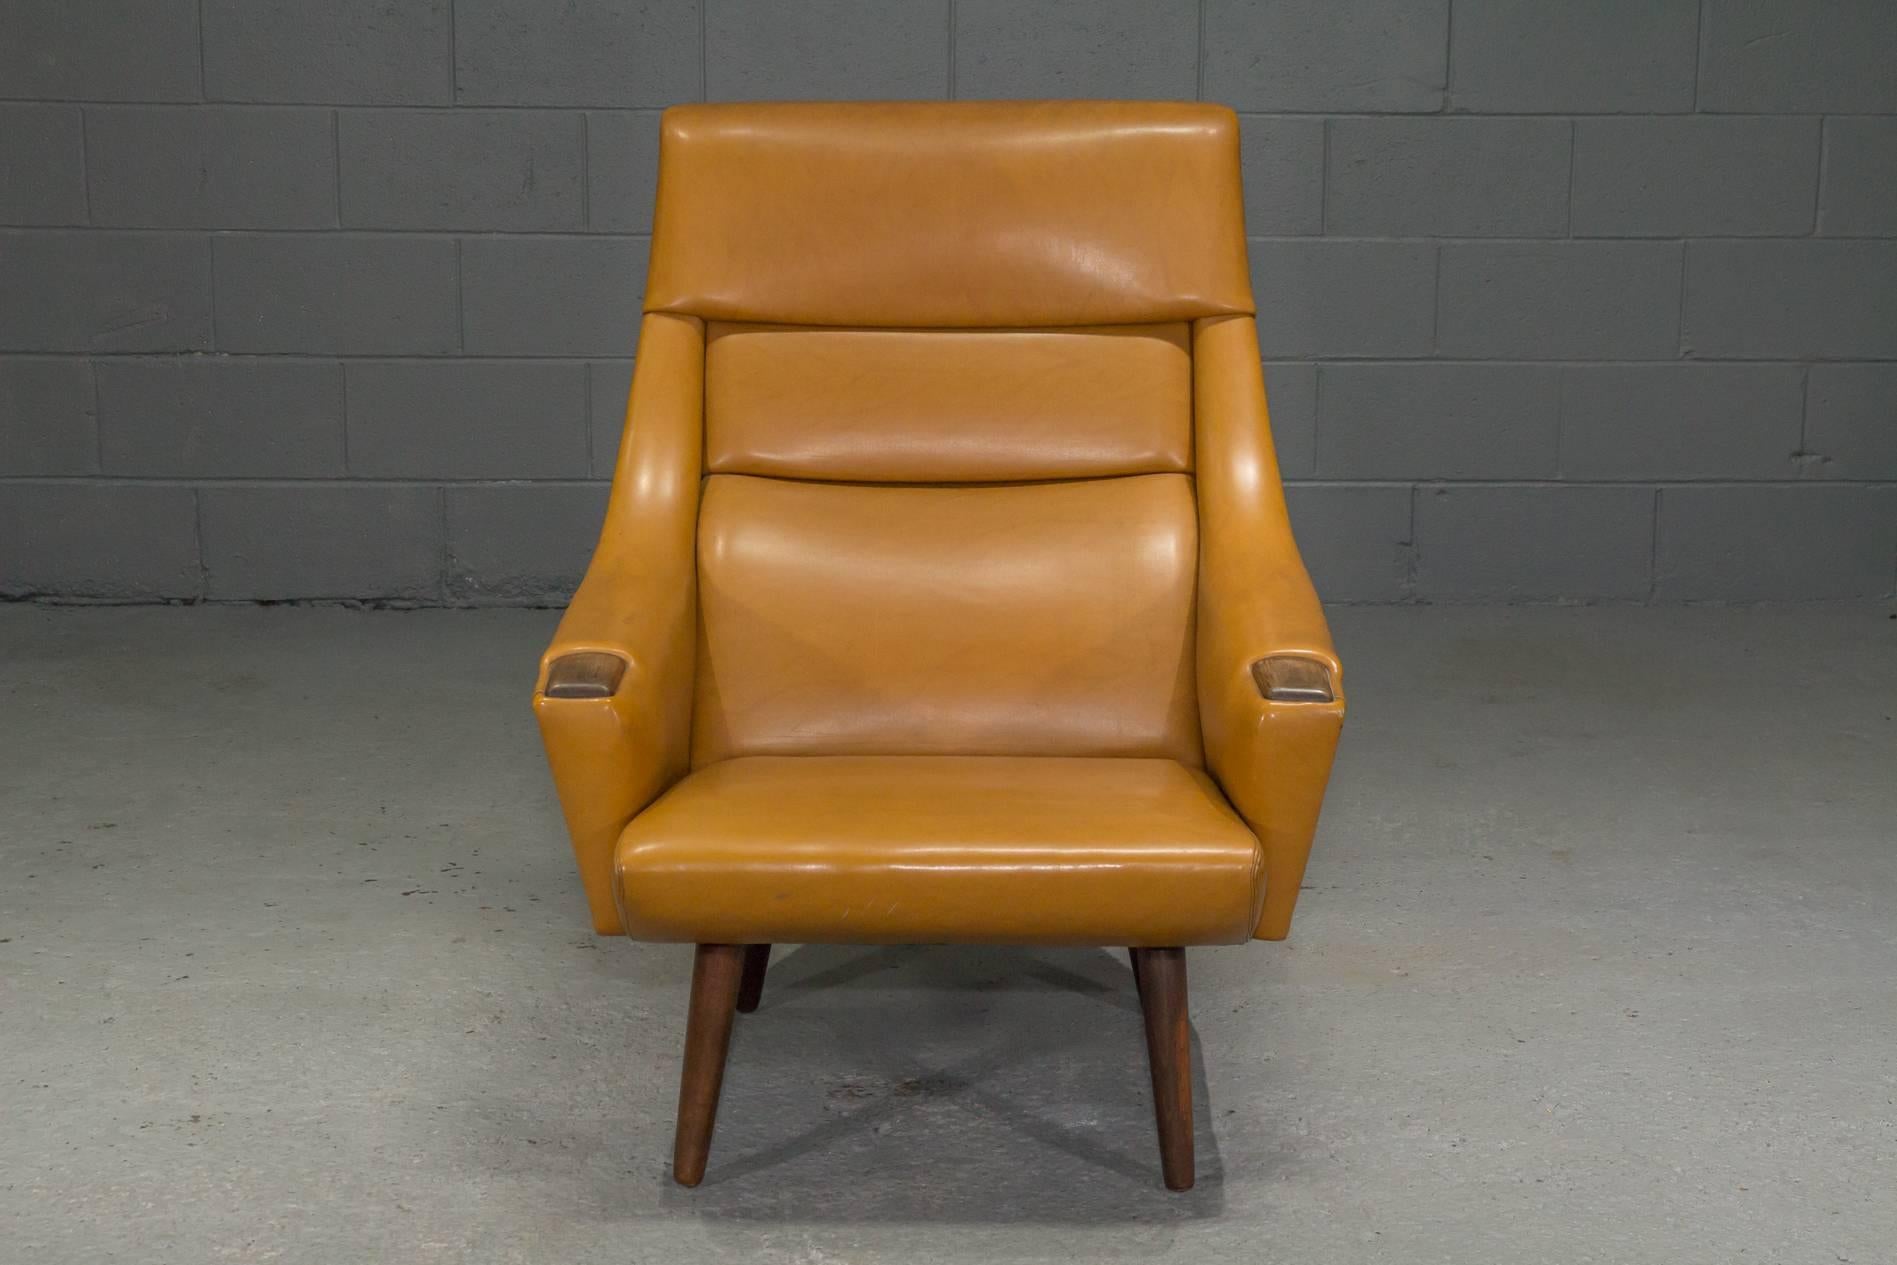 High Back Lounge Chair in Caramel Vinyl. This lounge chair is in all-original condition and is very comfortable.